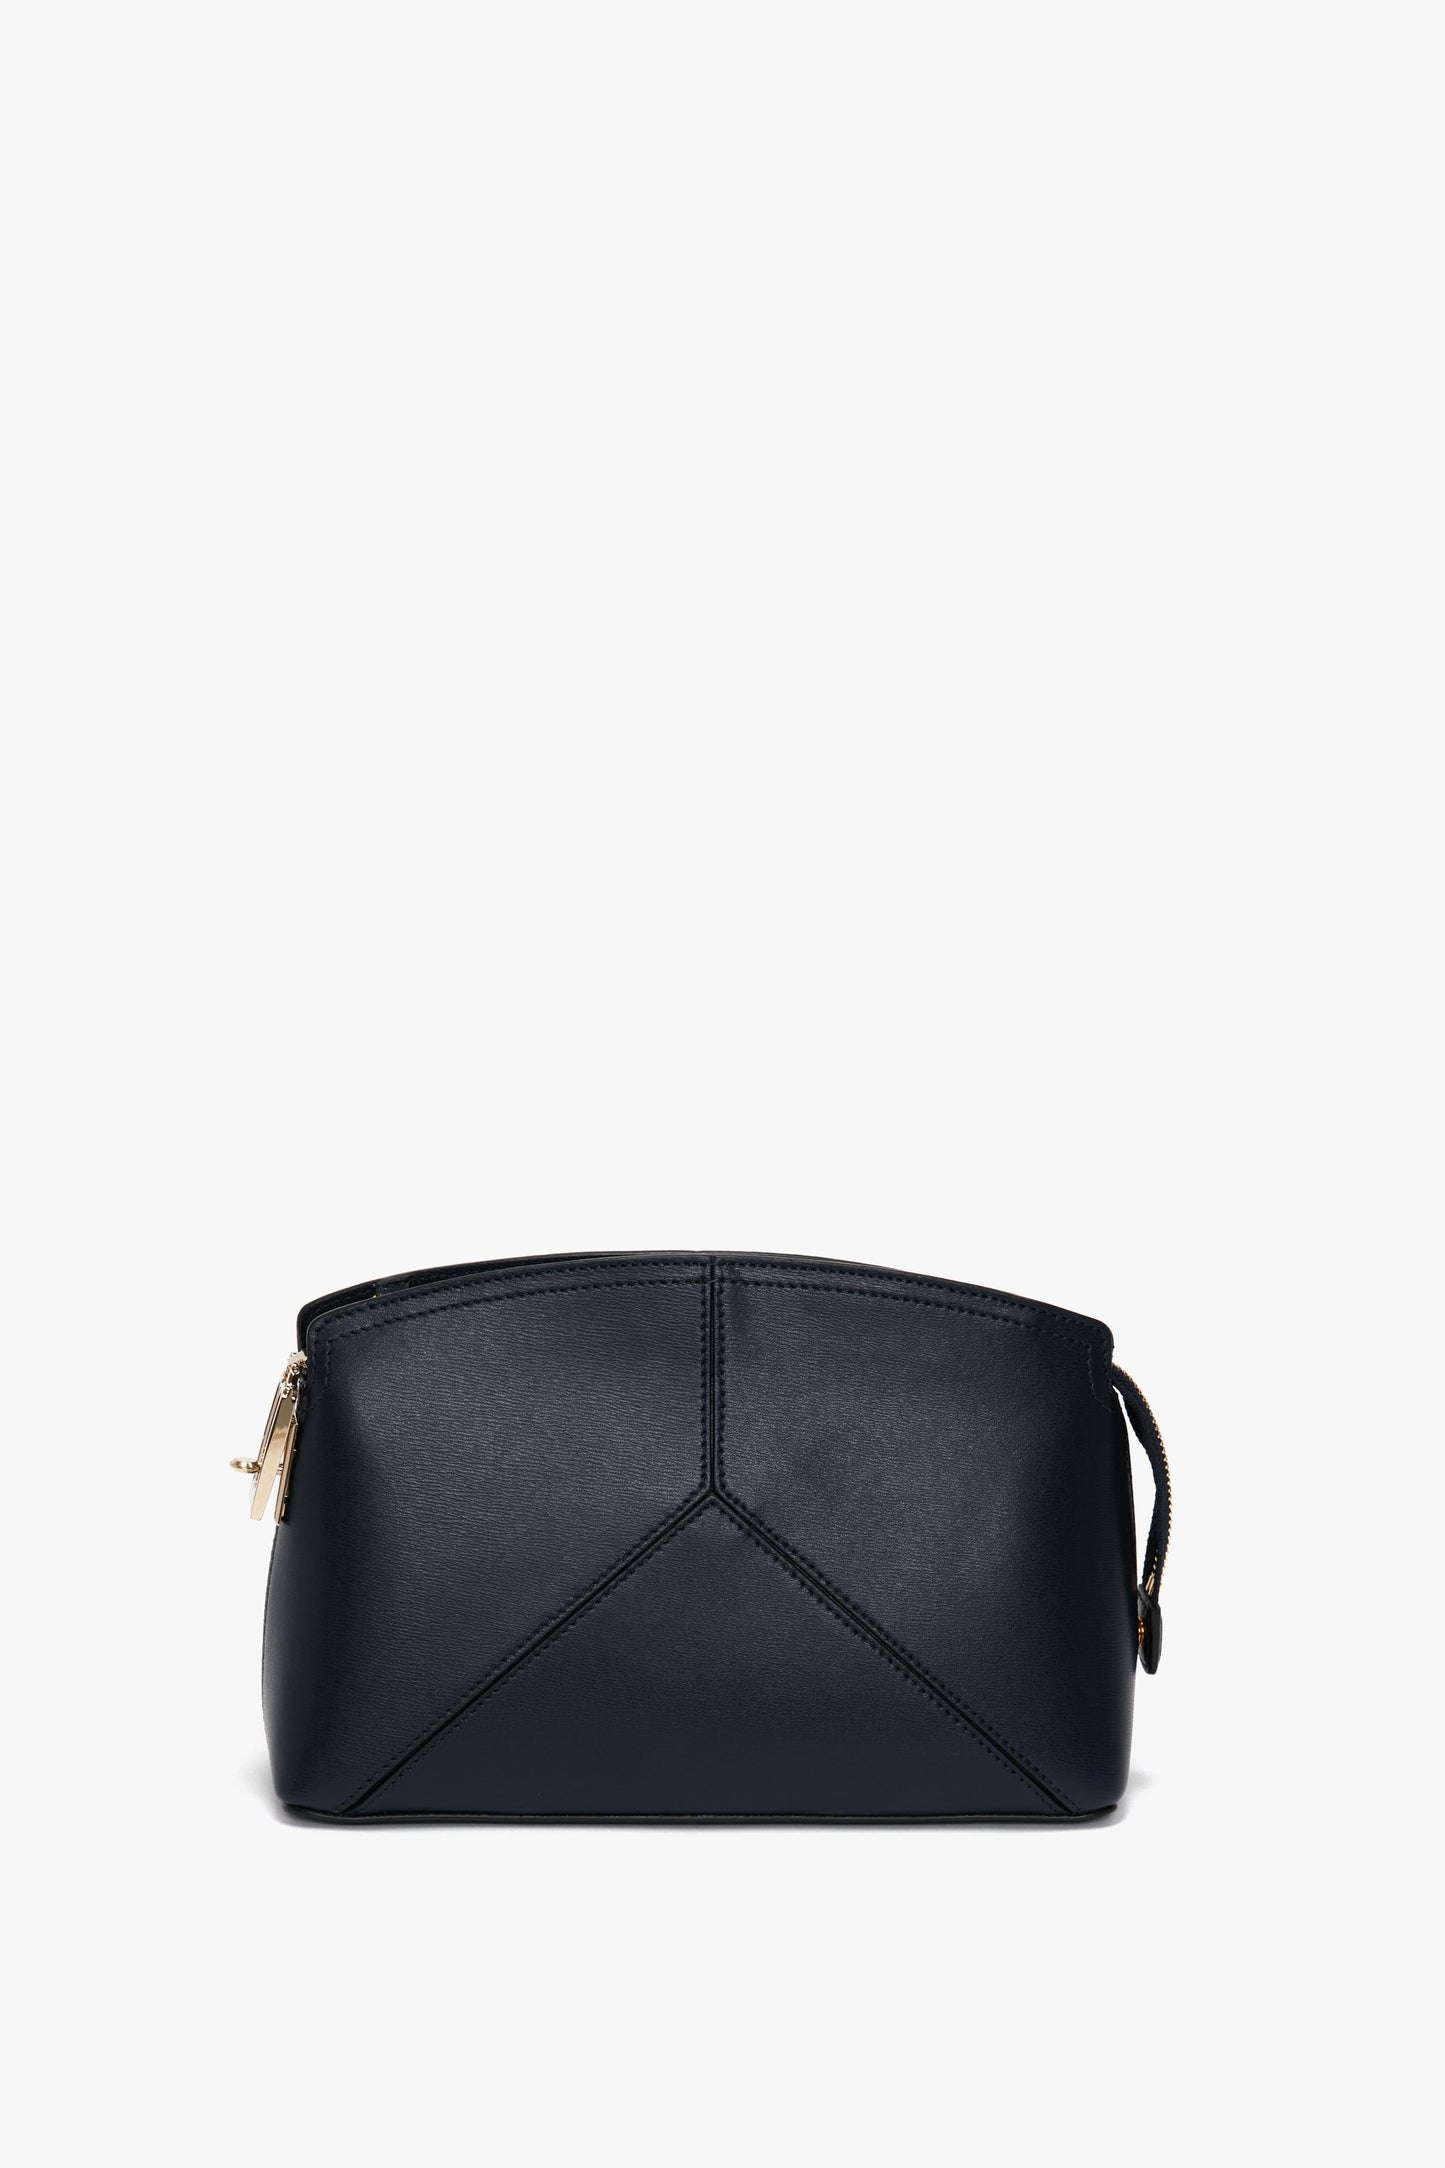 A Navy leather handbag with minimalistic design, featuring subtle stitching details and a gold zipper closure on the left side. This versatile clutch bag is perfect for any occasion. The **Exclusive Victoria Crossbody Bag In Navy Leather** by **Victoria Beckham** encapsulates both style and functionality, making it an ideal choice for any event.